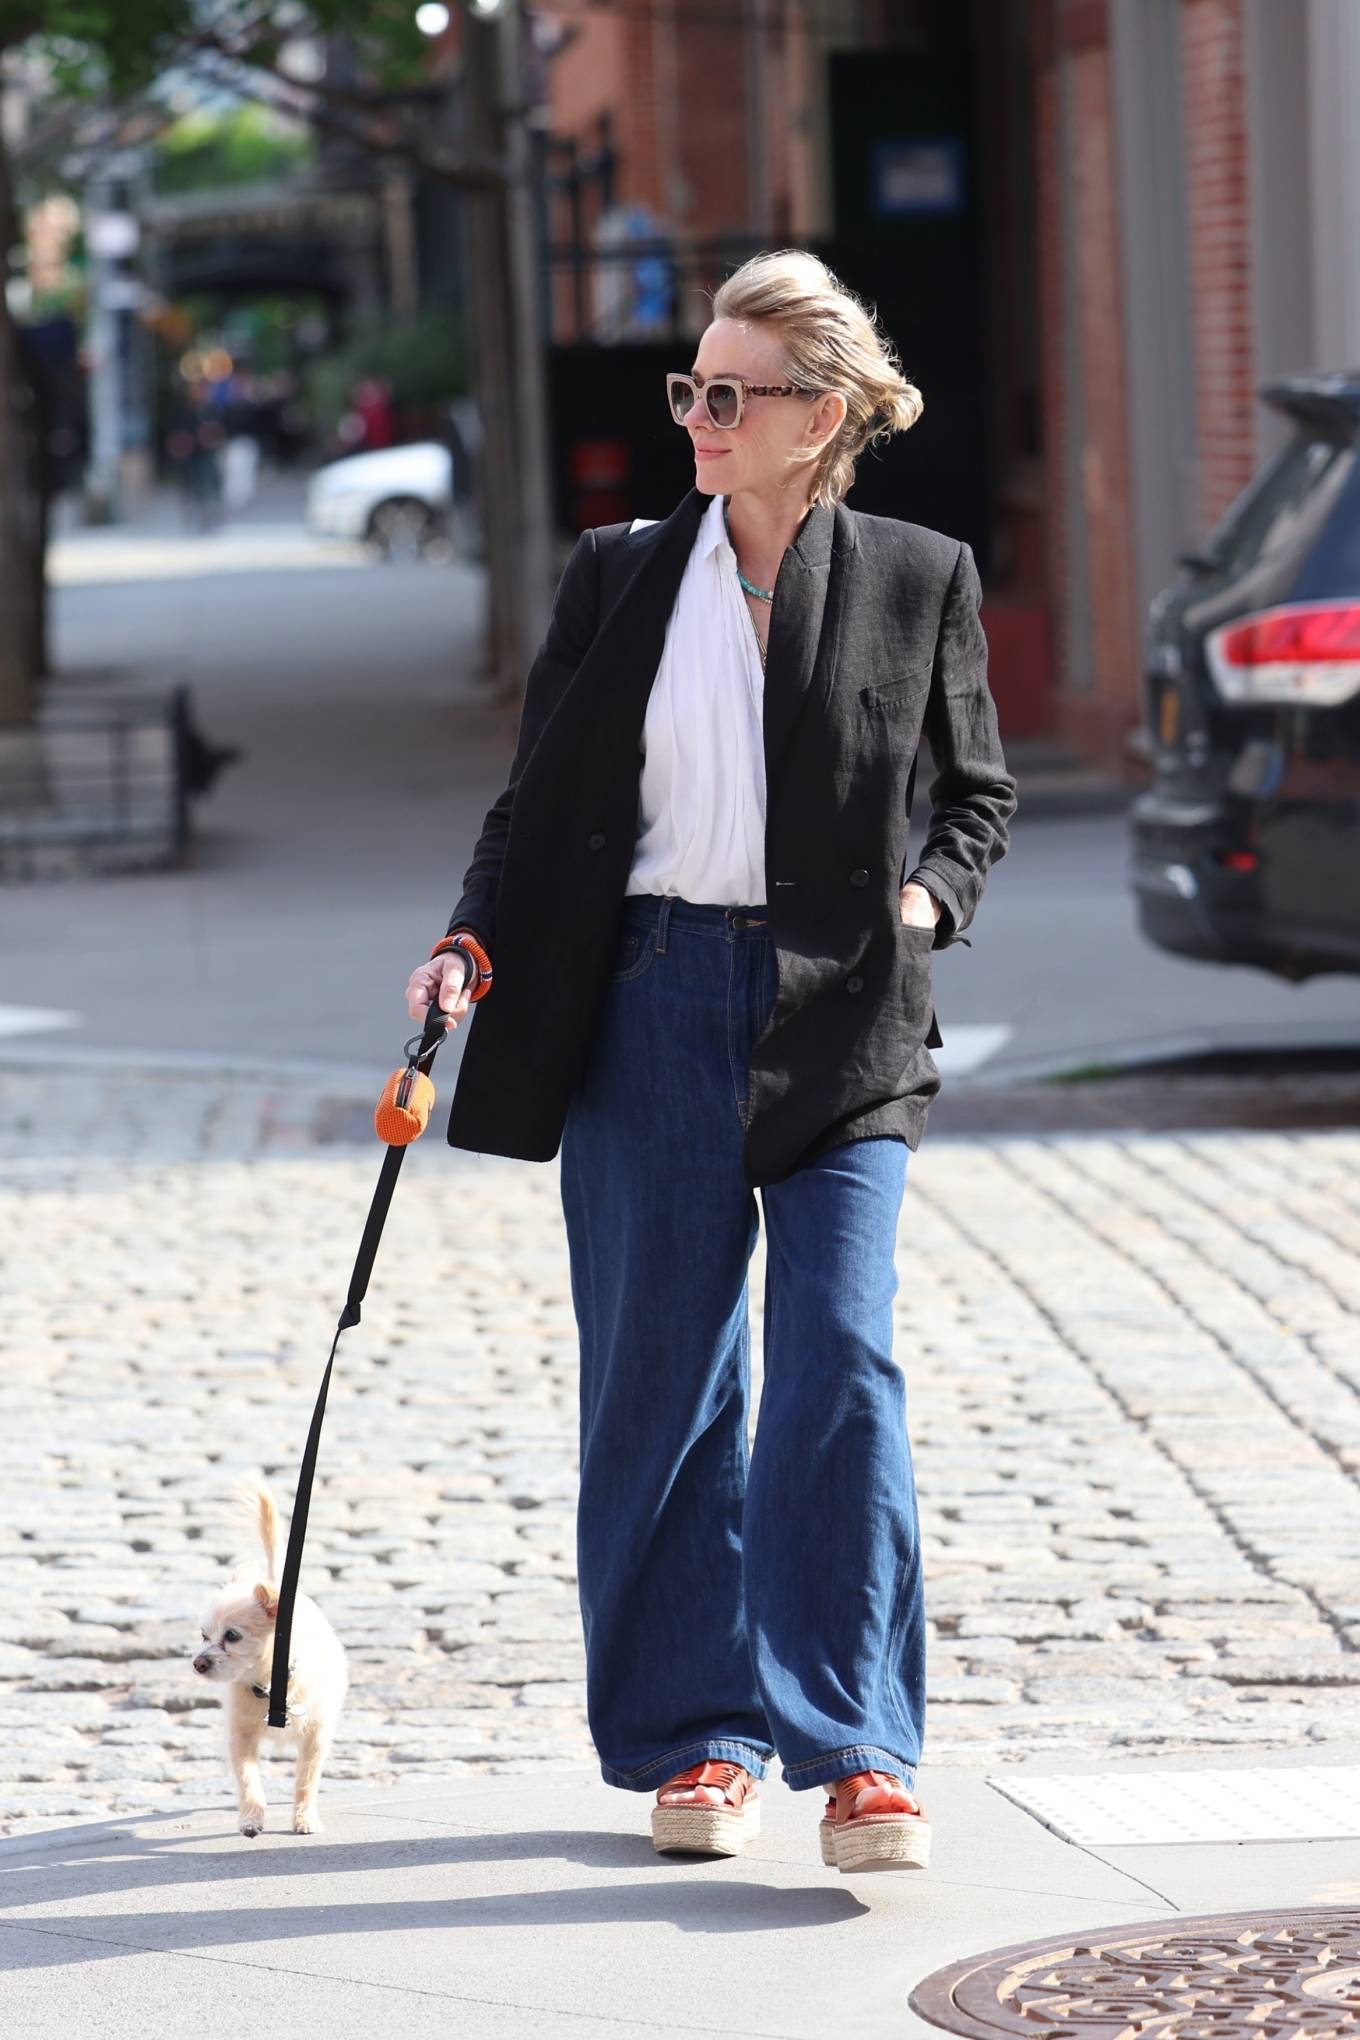 Naomi Watts - Was spotted walking her dog in Tribeca